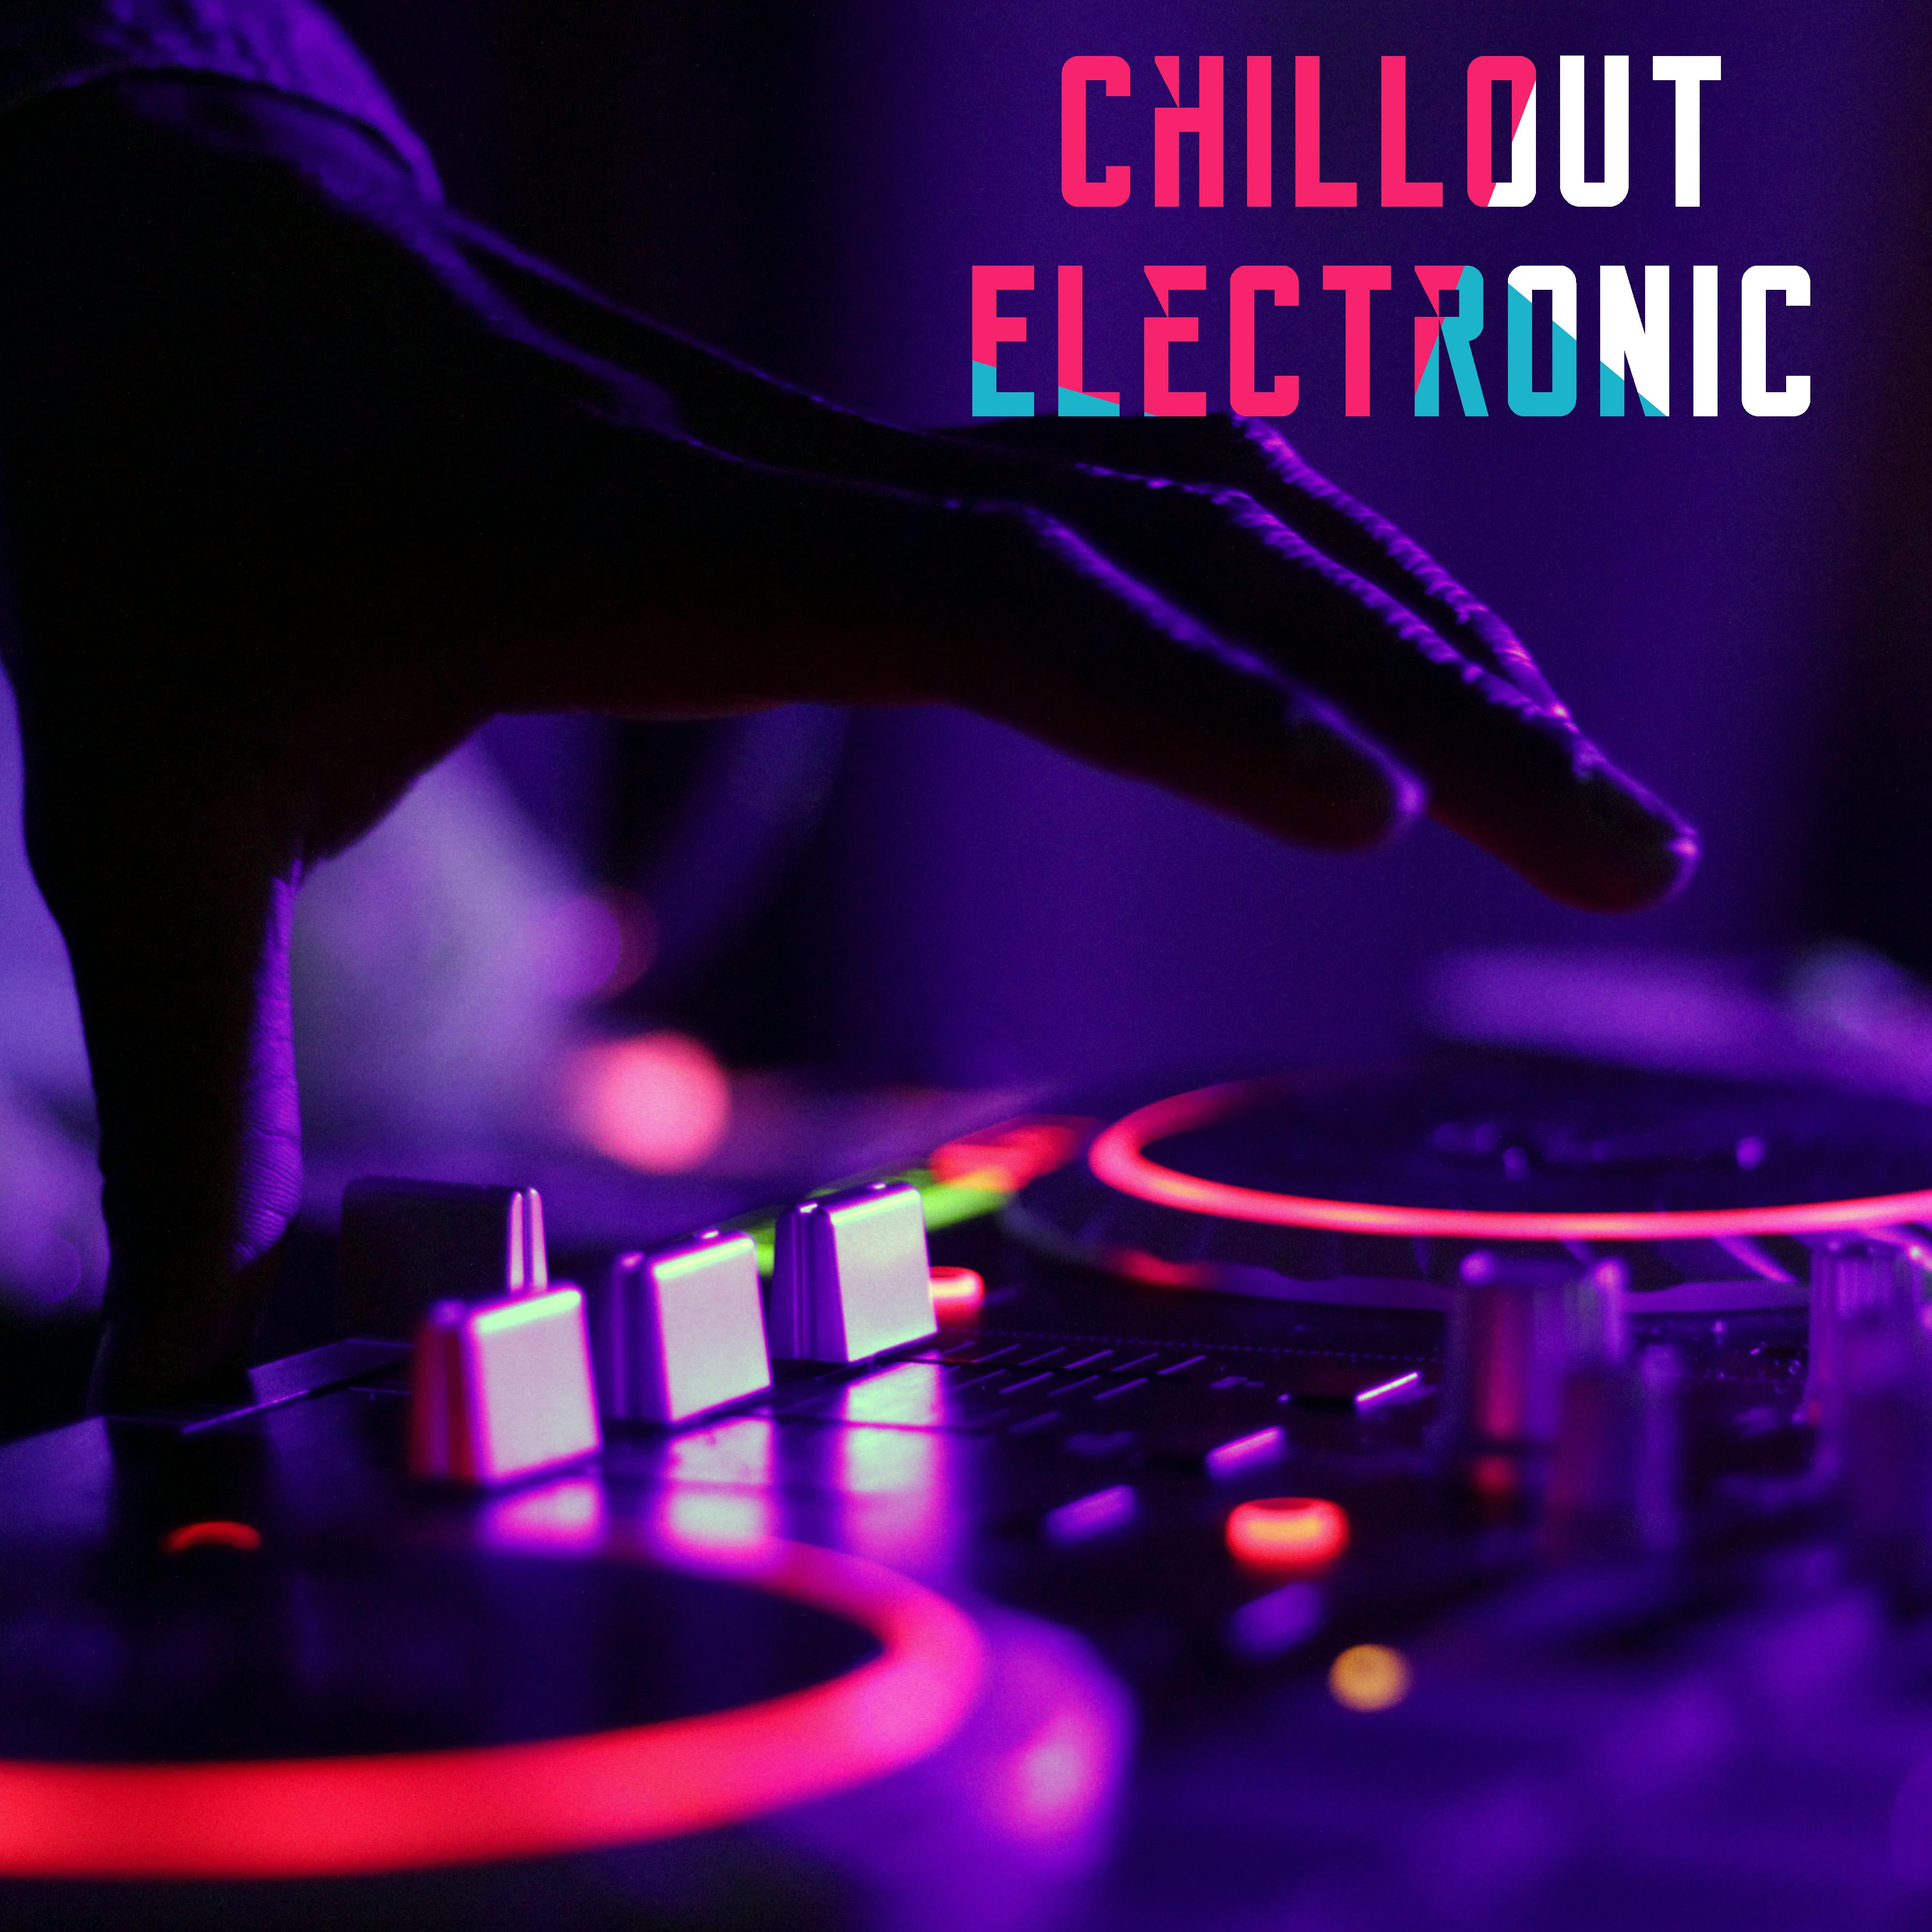 Chillout Electronic  Amazing Chill Out Beats, Relax  Chill, Dance Party, Summer Hits